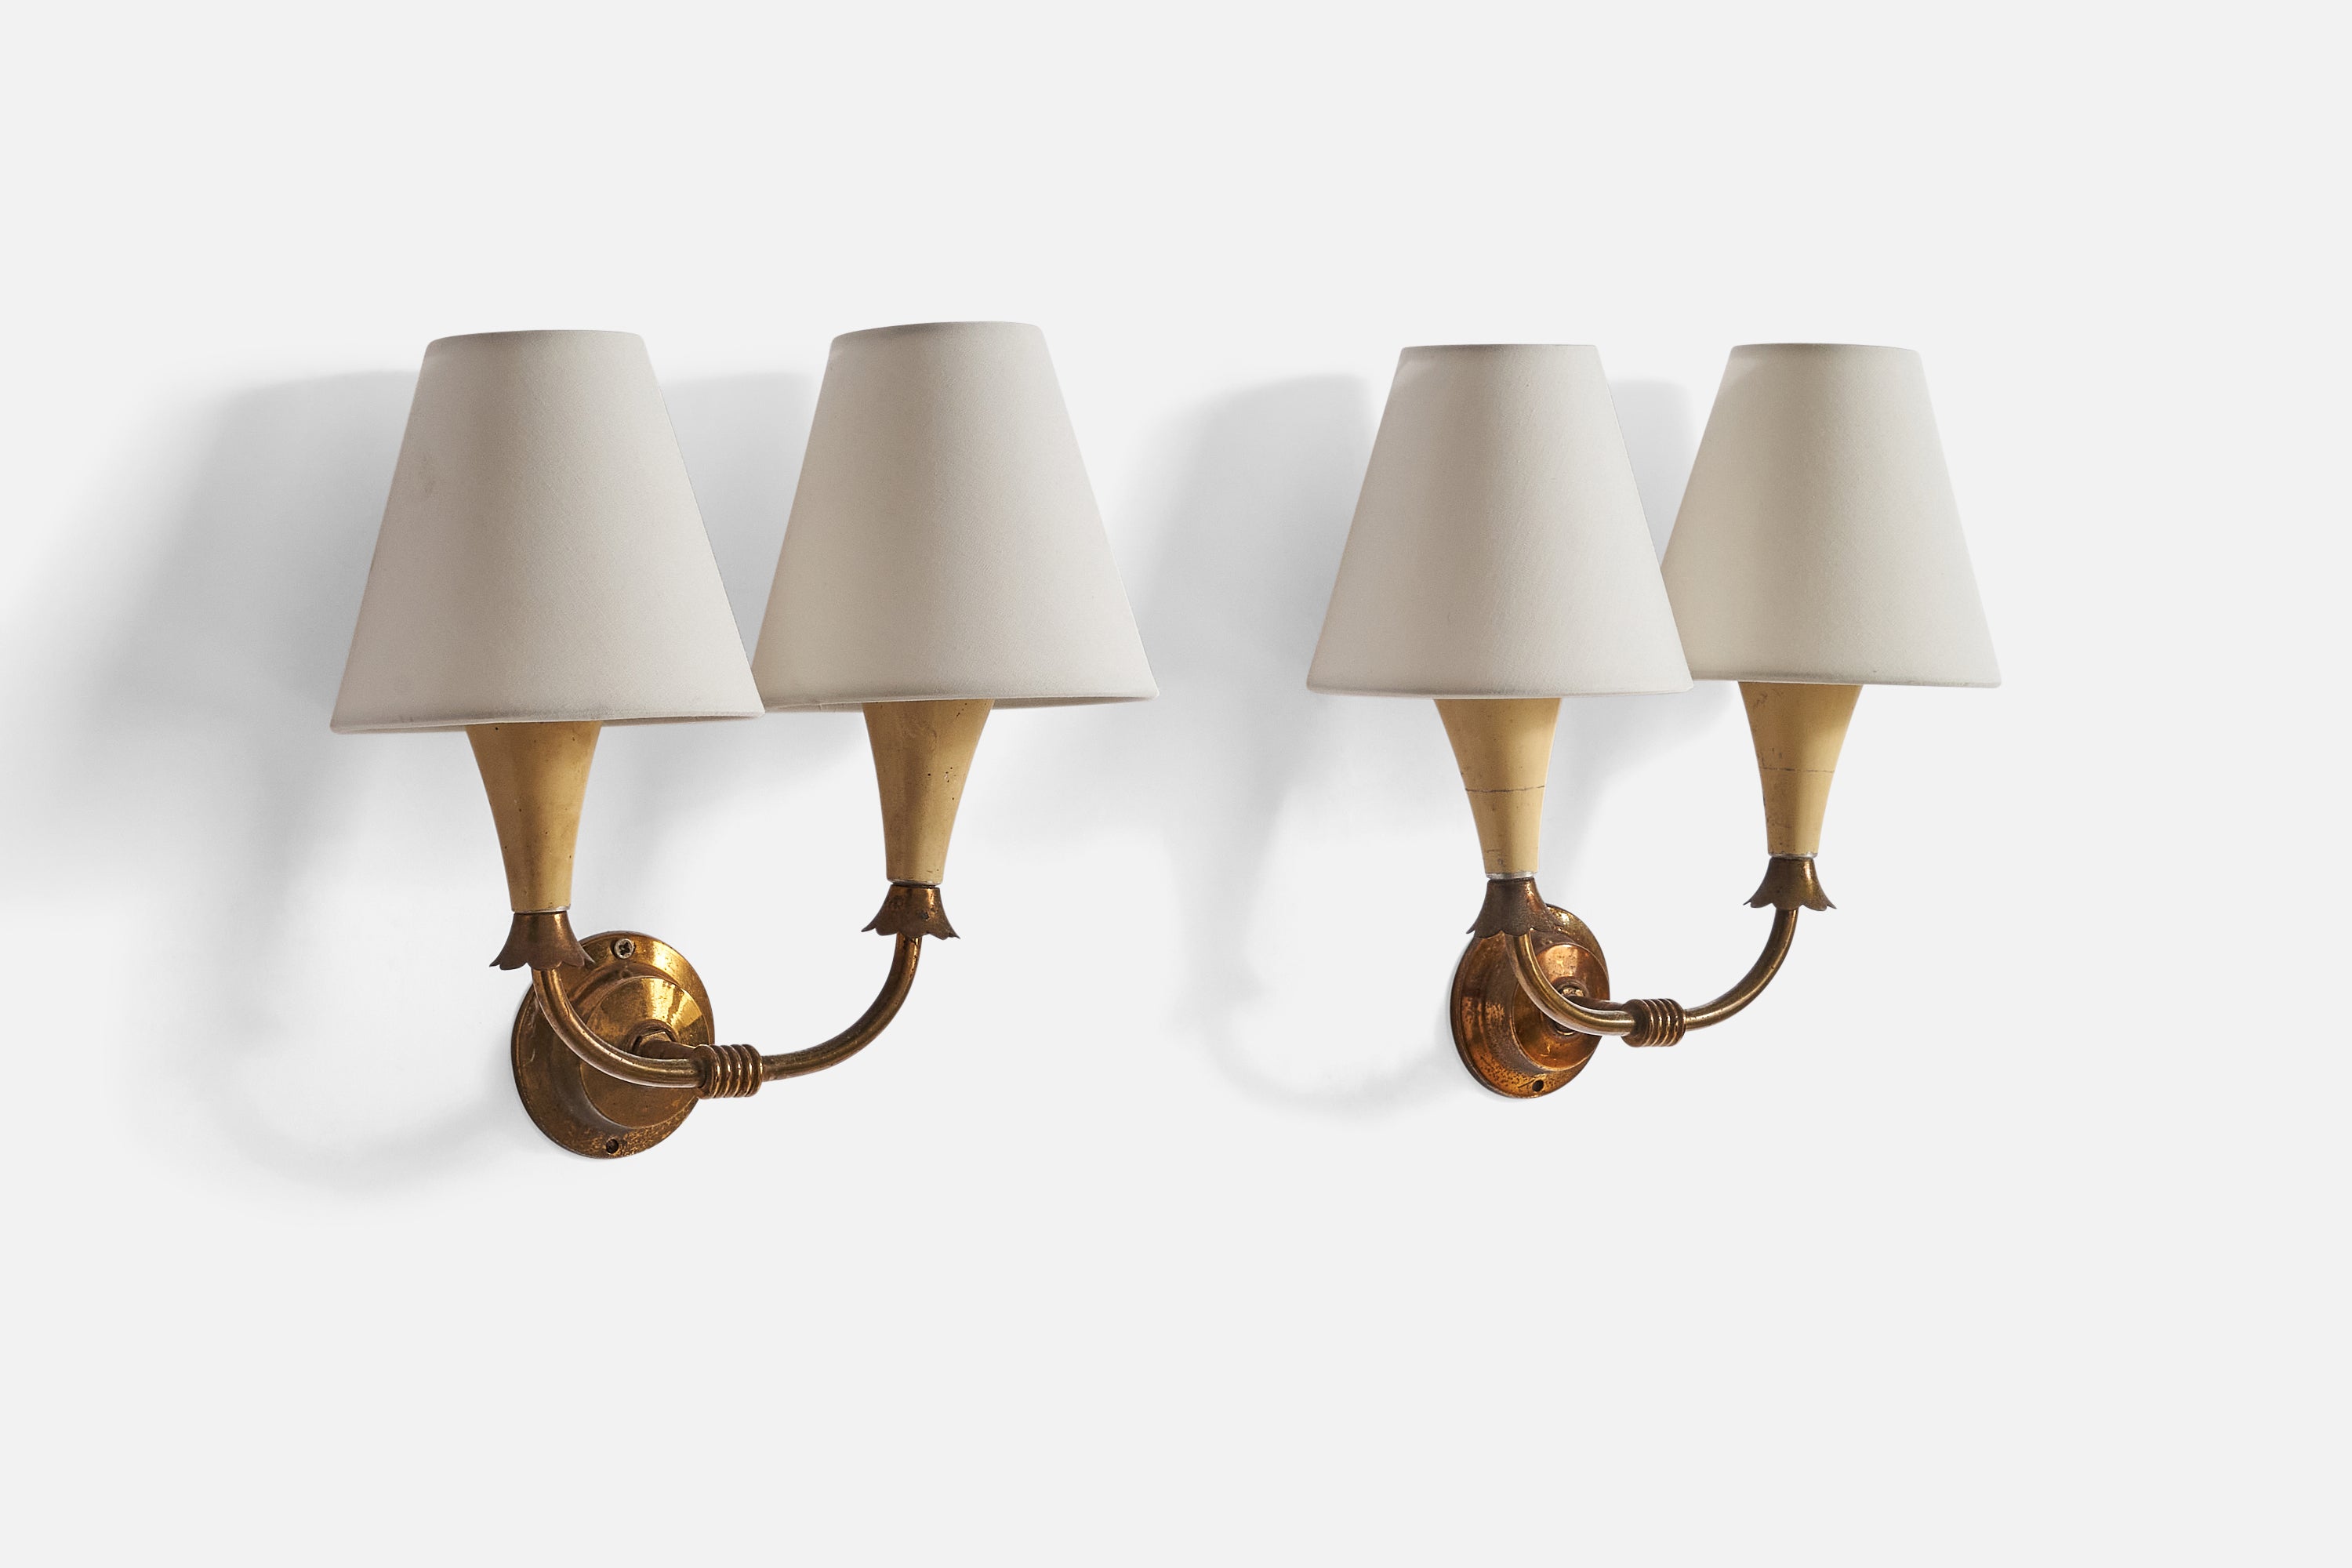 A pair of brass, beige-lacquered metal and white fabric wall lights designed and produced in Italy, 1940s.

Overall Dimensions (inches): 6.75”  H x 7.5” W x 3.25” D
Back Plate Dimensions (inches): 2.5” H x 2.5”  W x .75”  D
Bulb Specifications: E-14